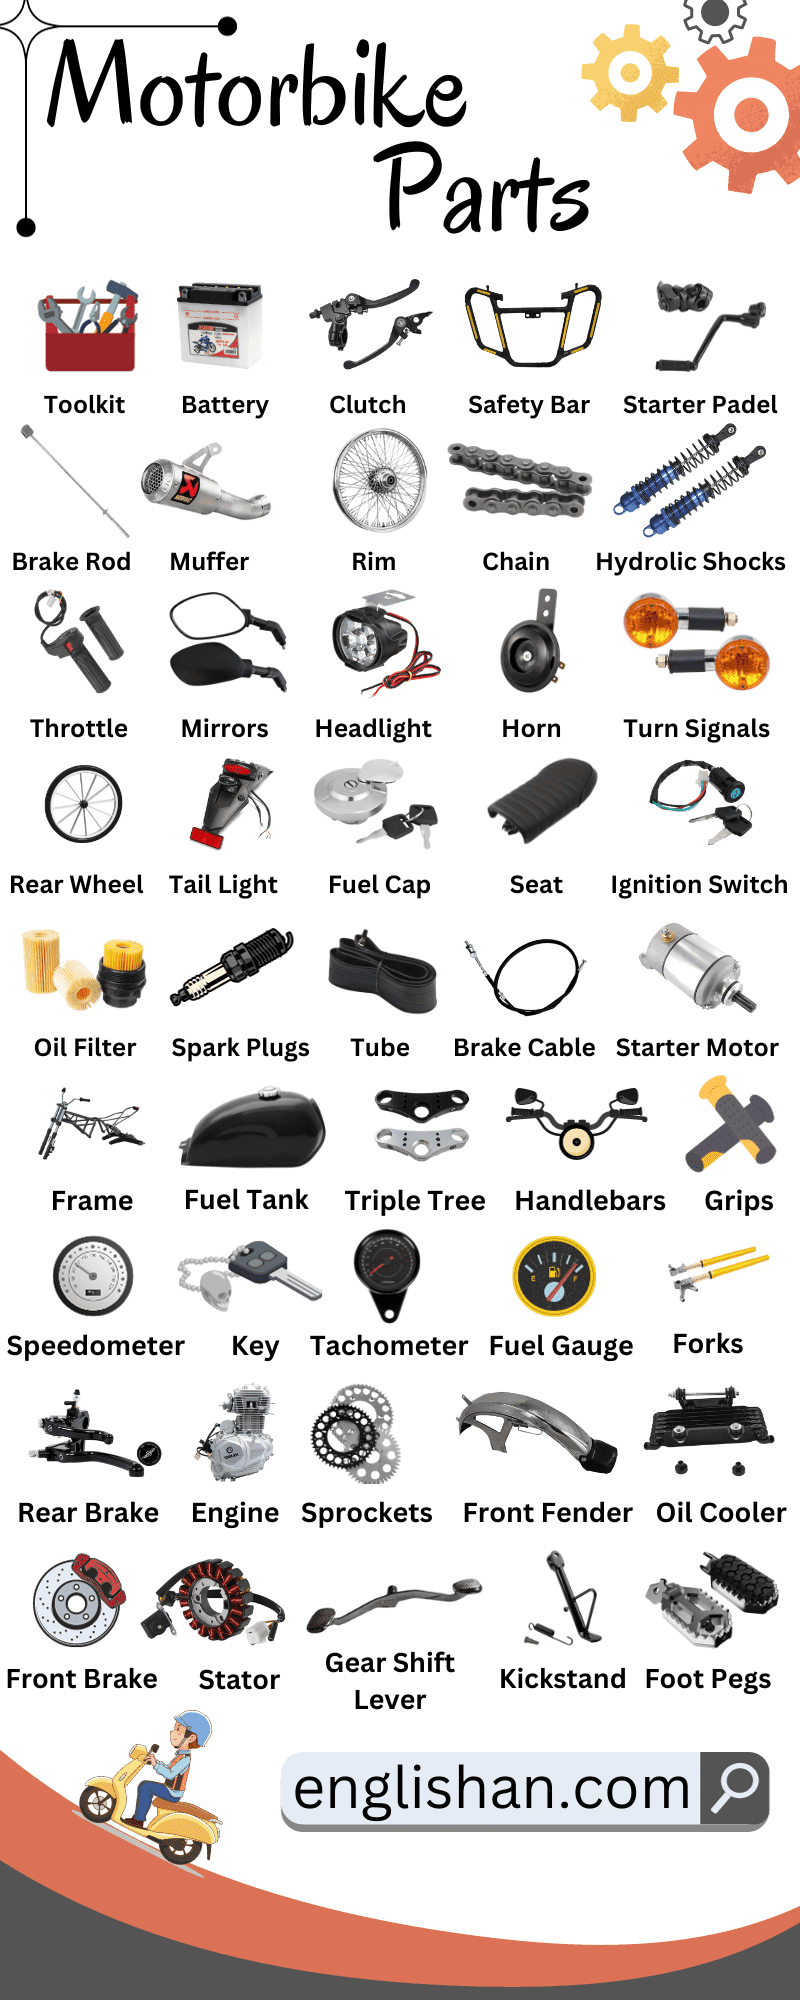 30 Basic Parts of Motorcycle & Their Functions [Names & PDF]